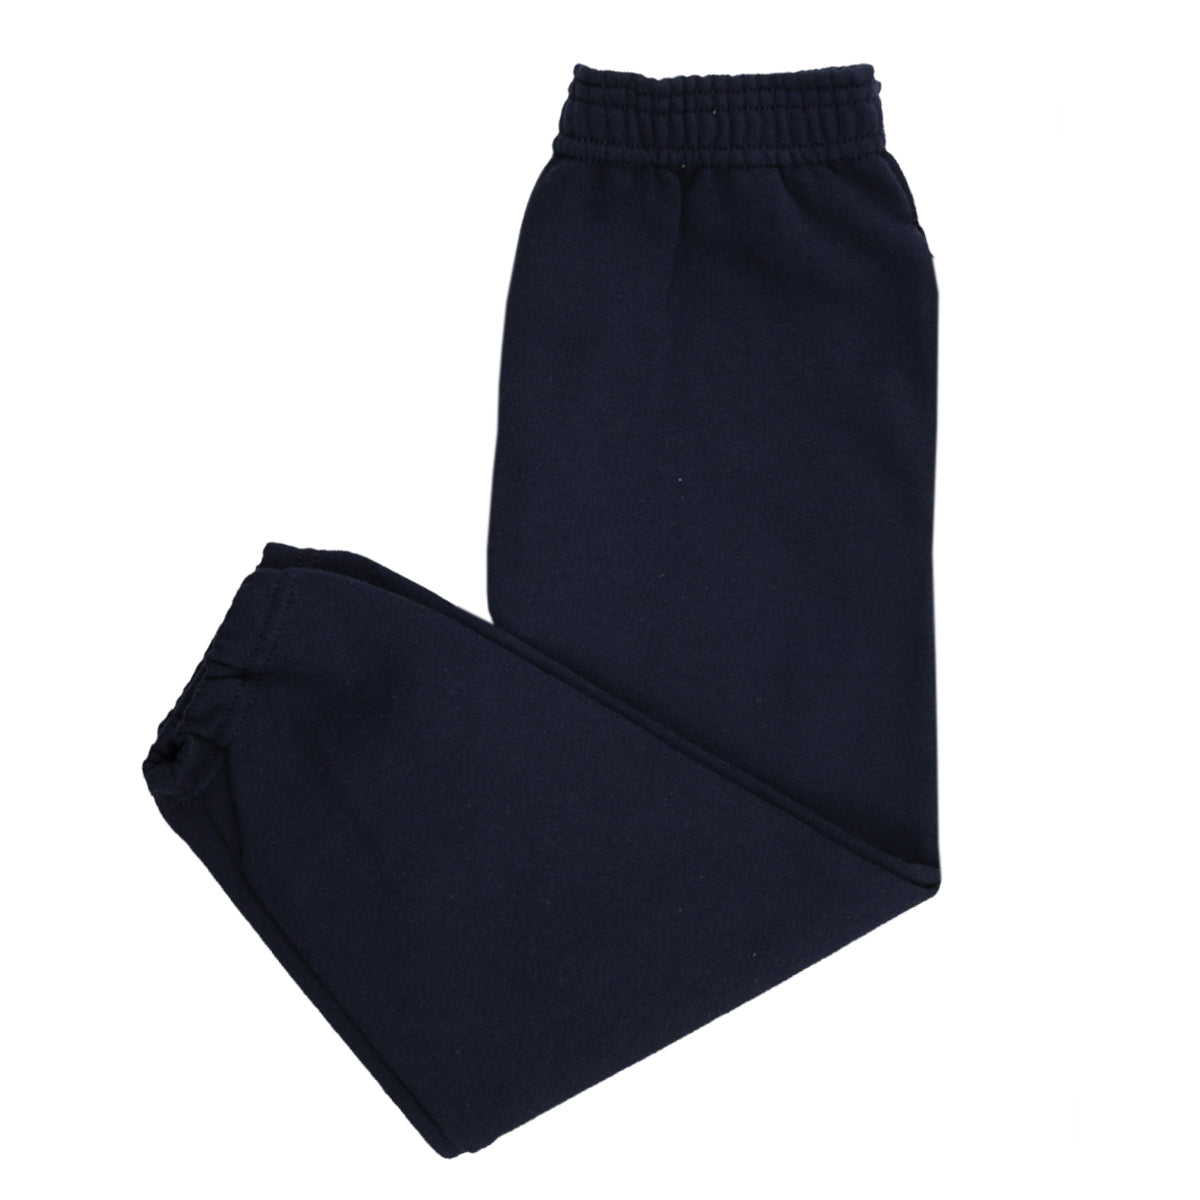 A photo of the Lansdowne Lodge Montessori Tracksuit Bottoms in Navy, flay lay